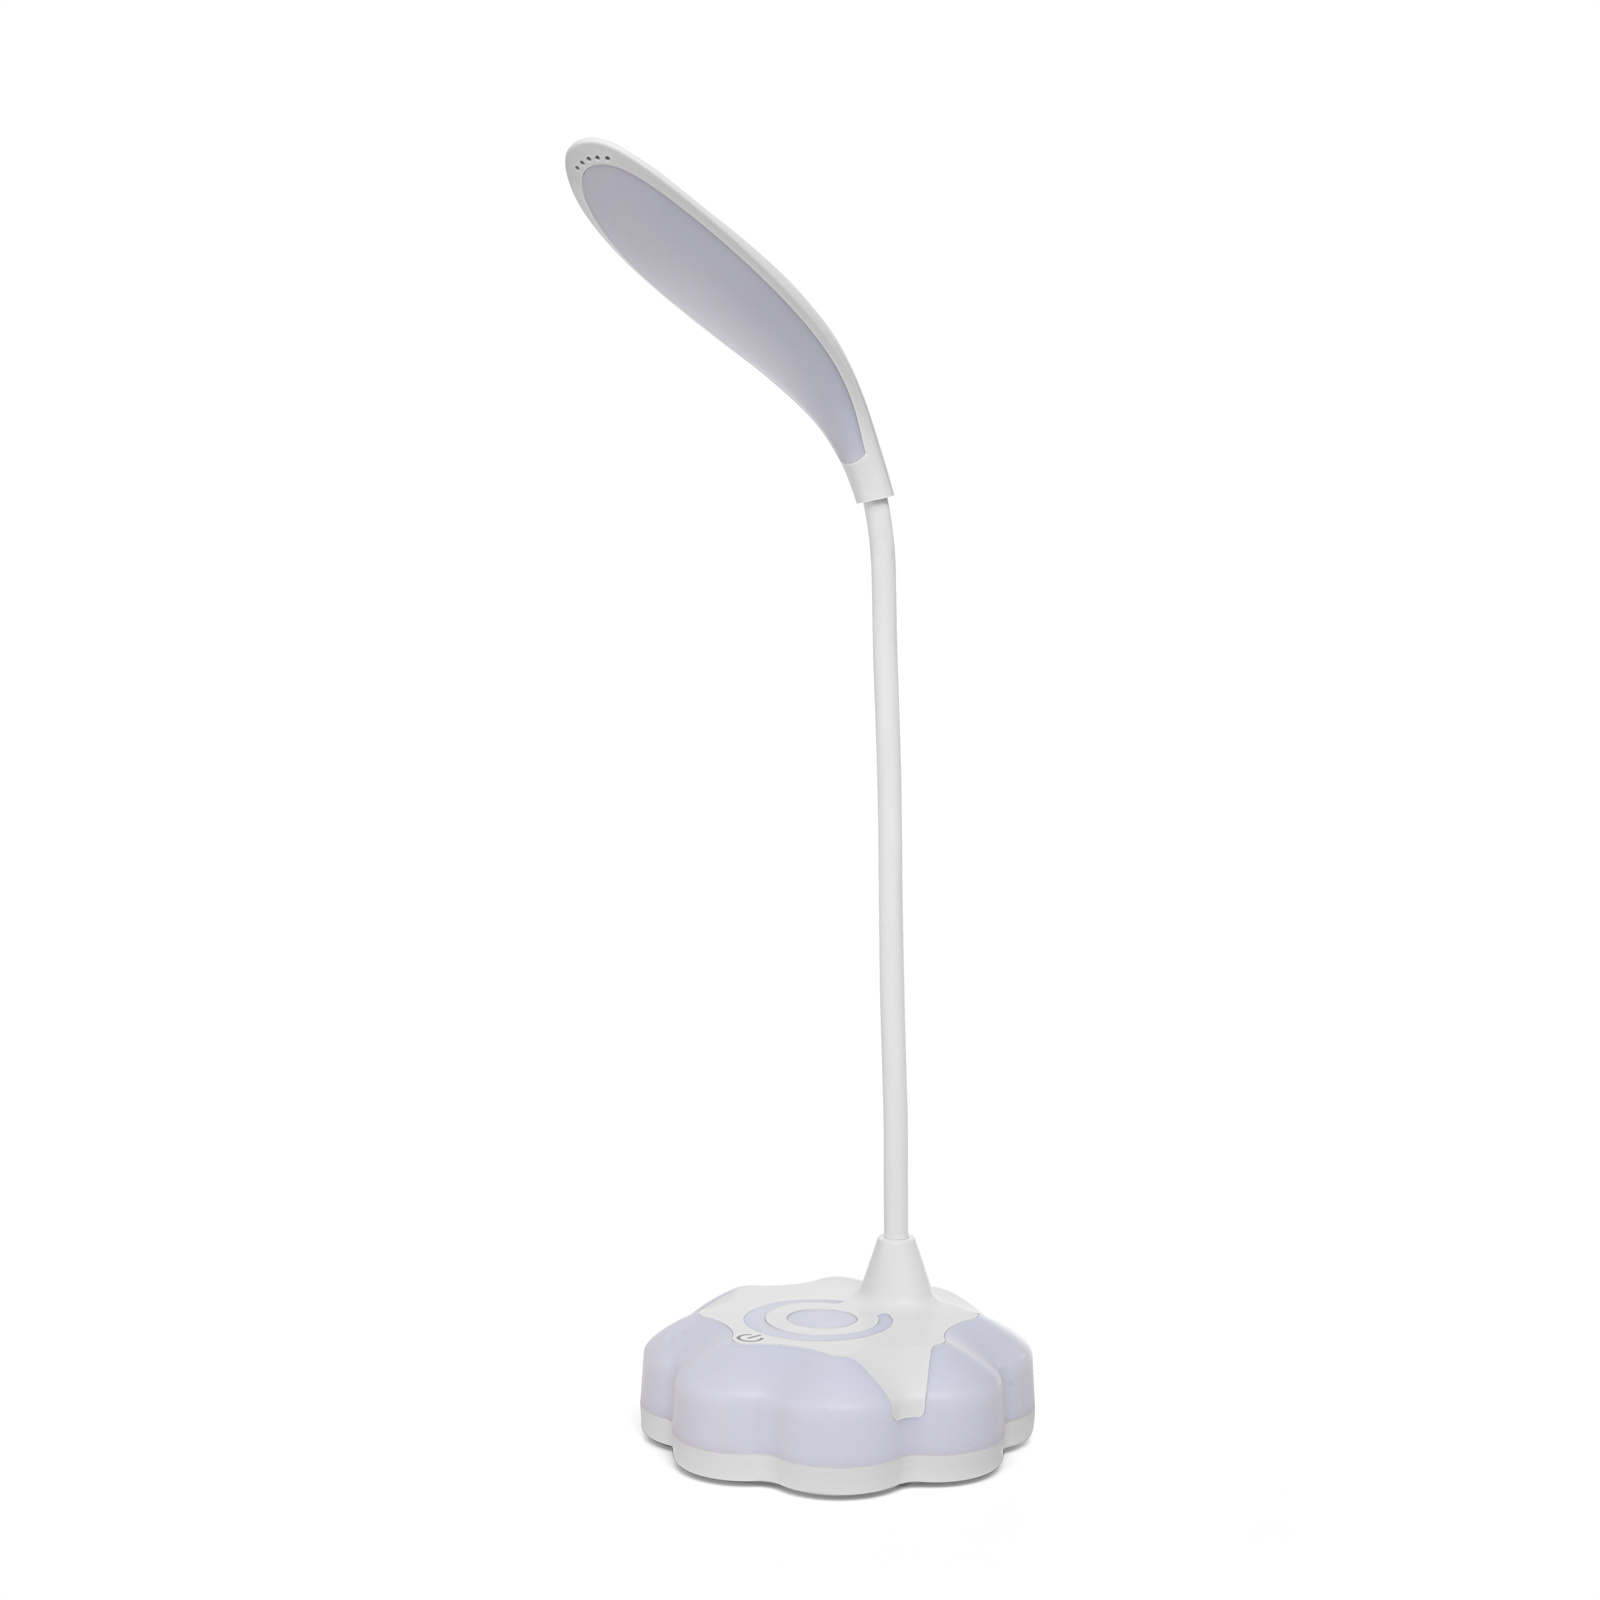 Led Desk Lamp Usb Charging Flexible Adjustable Angle Touch Control Table Lamp